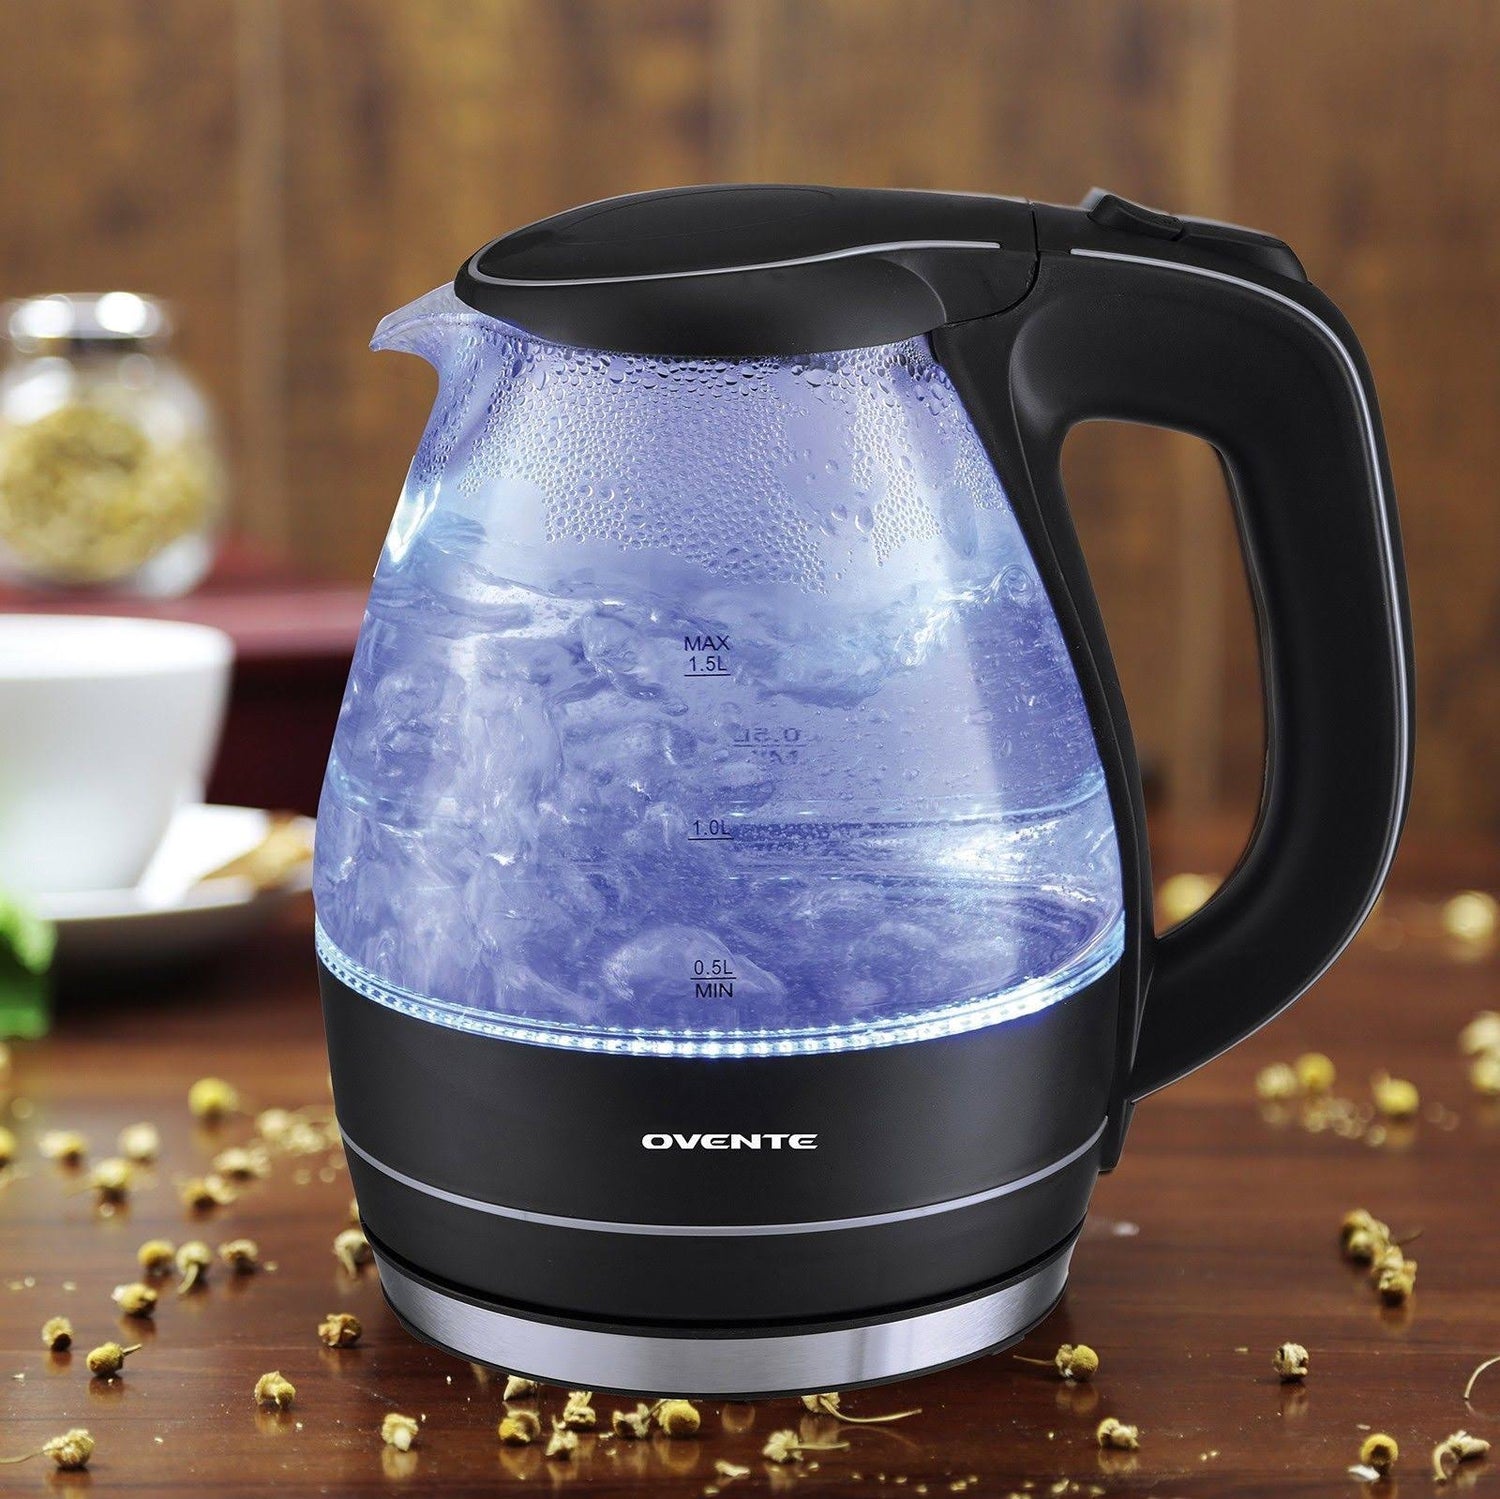 Ovente Portable Electric Glass Kettle 1.5 Liter with Blue LED Light and  Stainless Steel Base, Black KG83B - Bed Bath & Beyond - 8122375